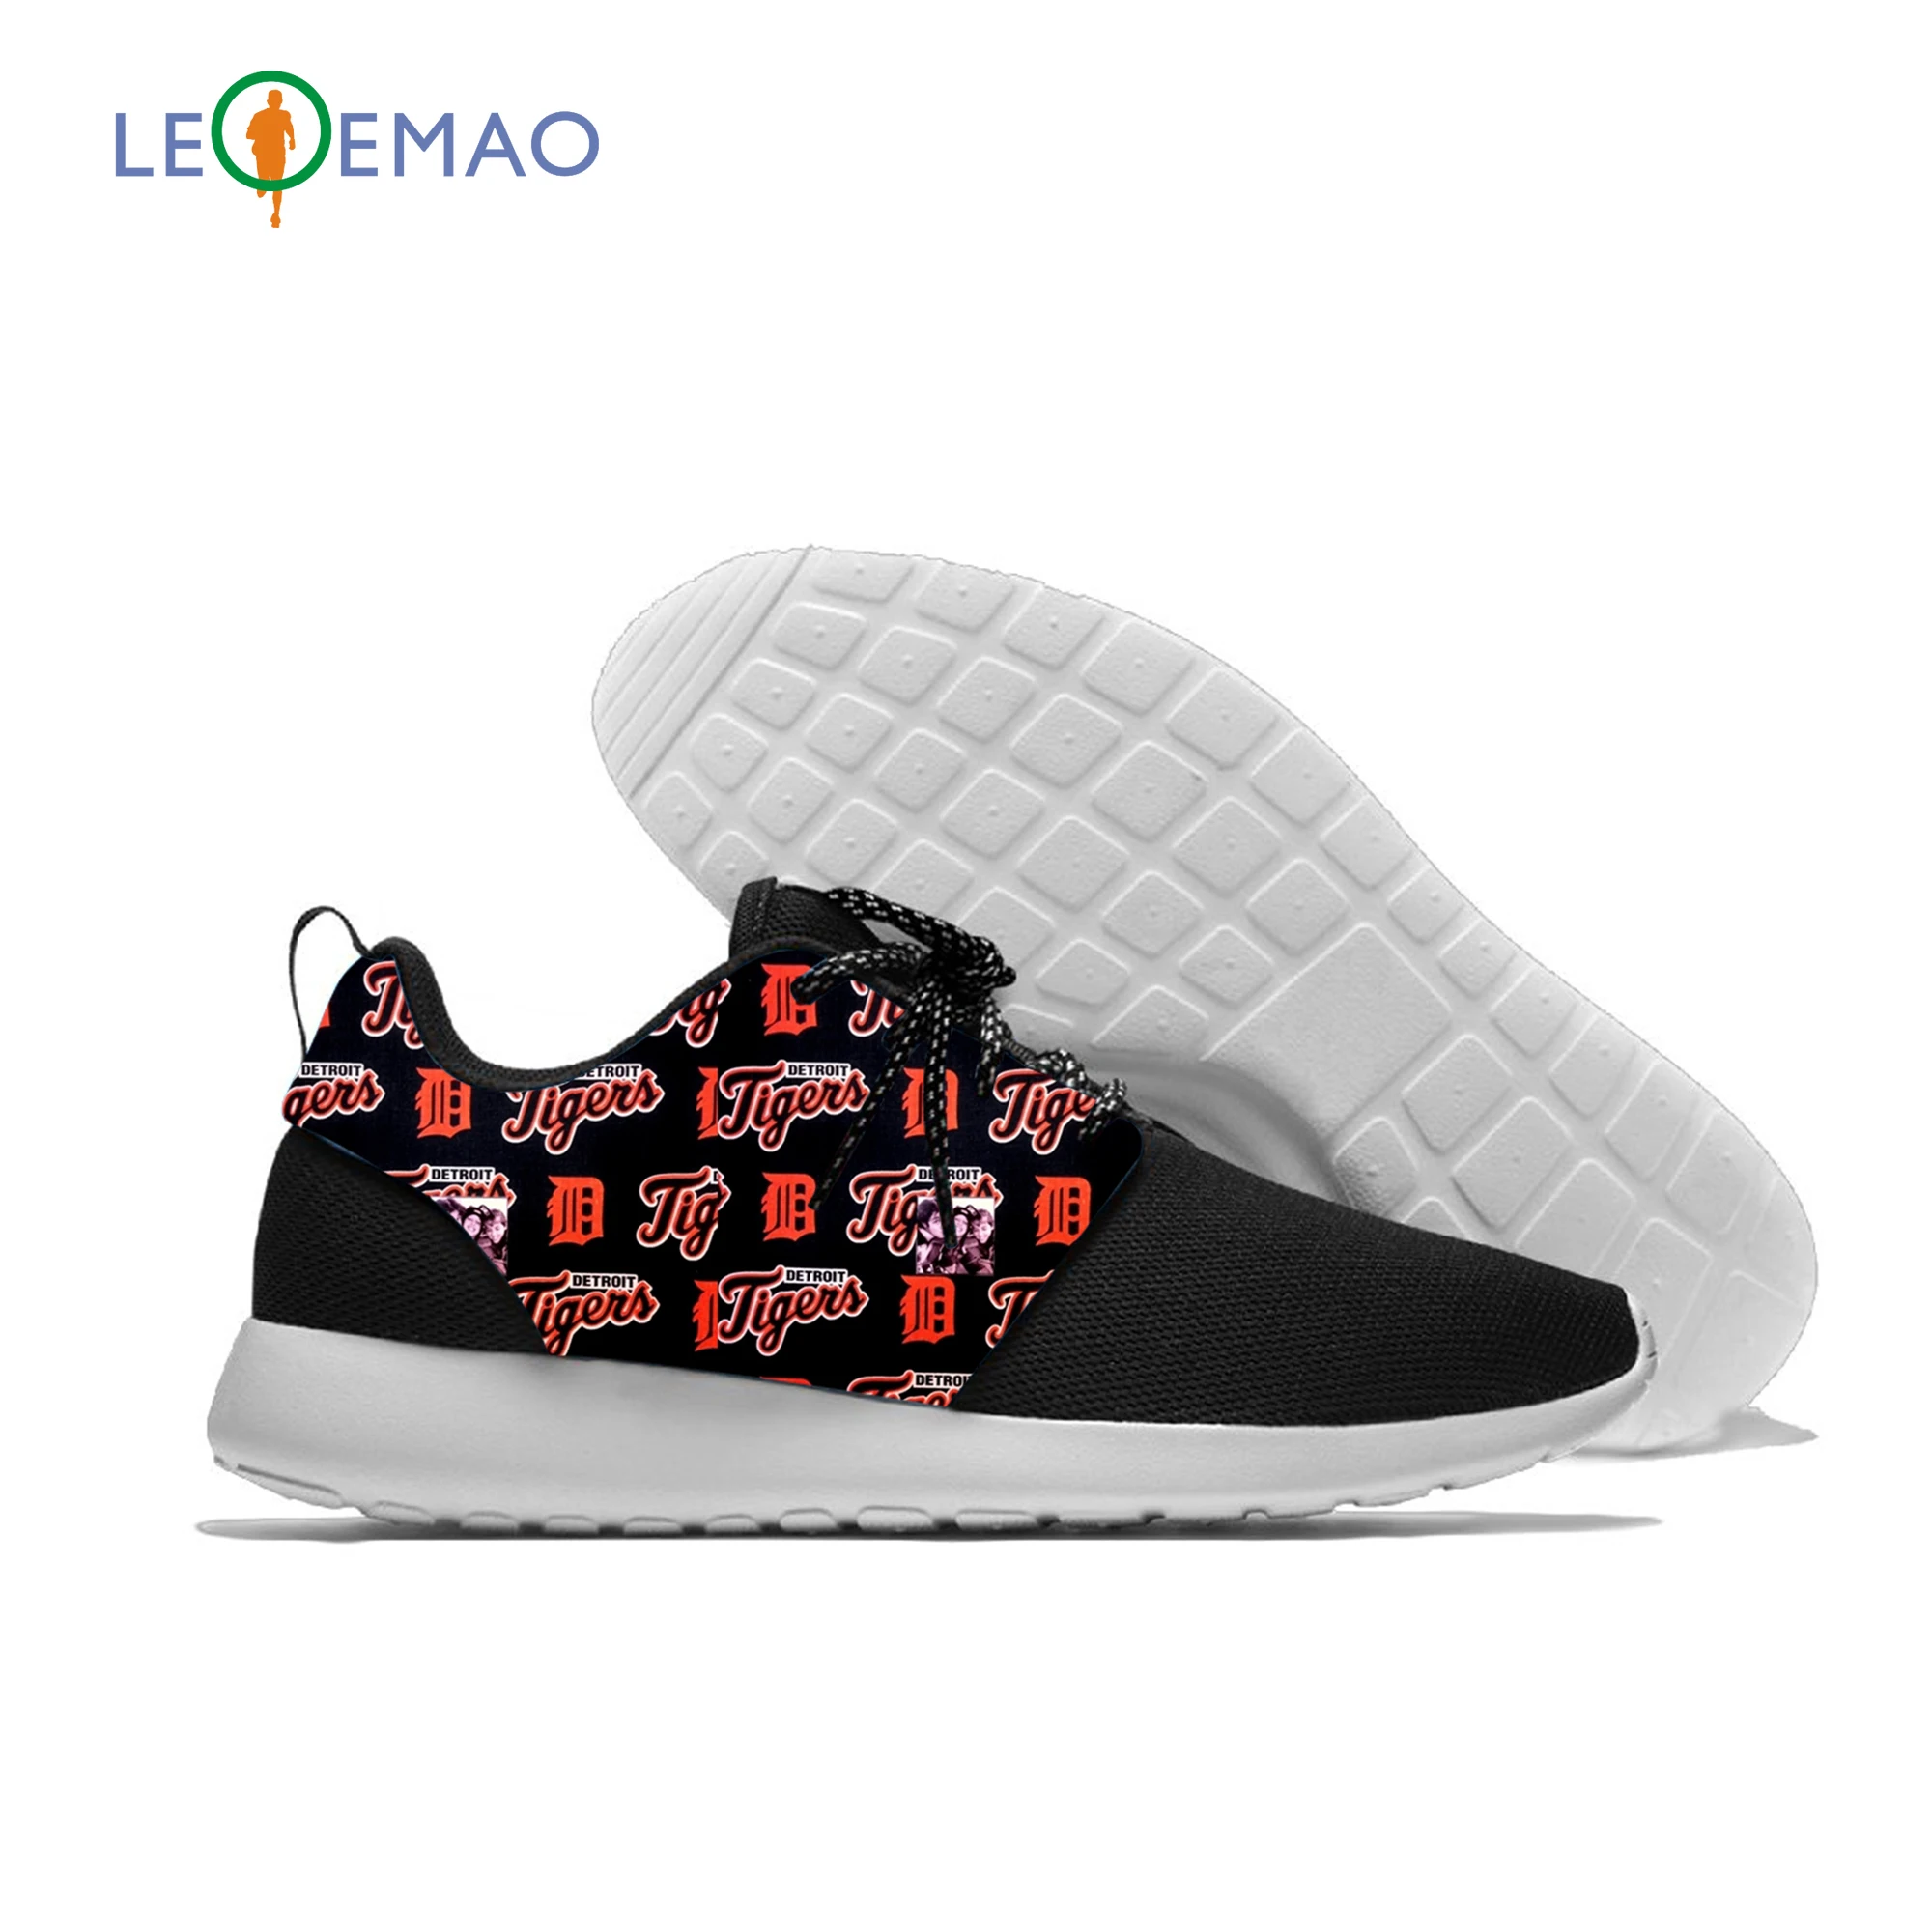 

2020 Hot Fashion Printing Tigers Sneakers Unisex Lightweight Detroit Baseball Team Fans Casual Shoes